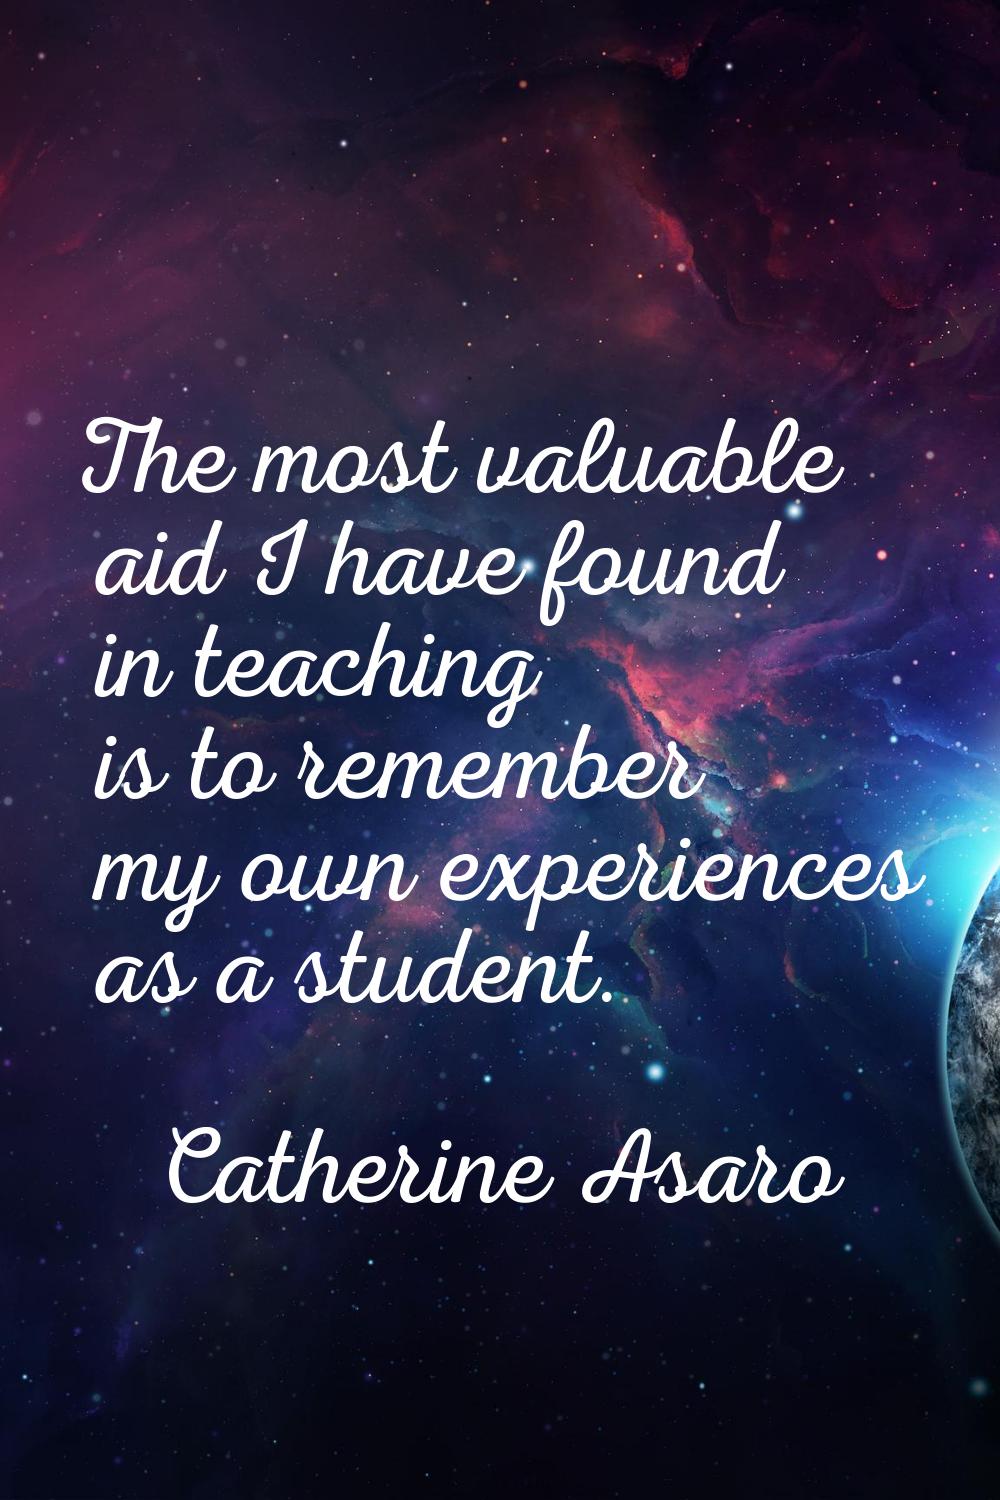 The most valuable aid I have found in teaching is to remember my own experiences as a student.